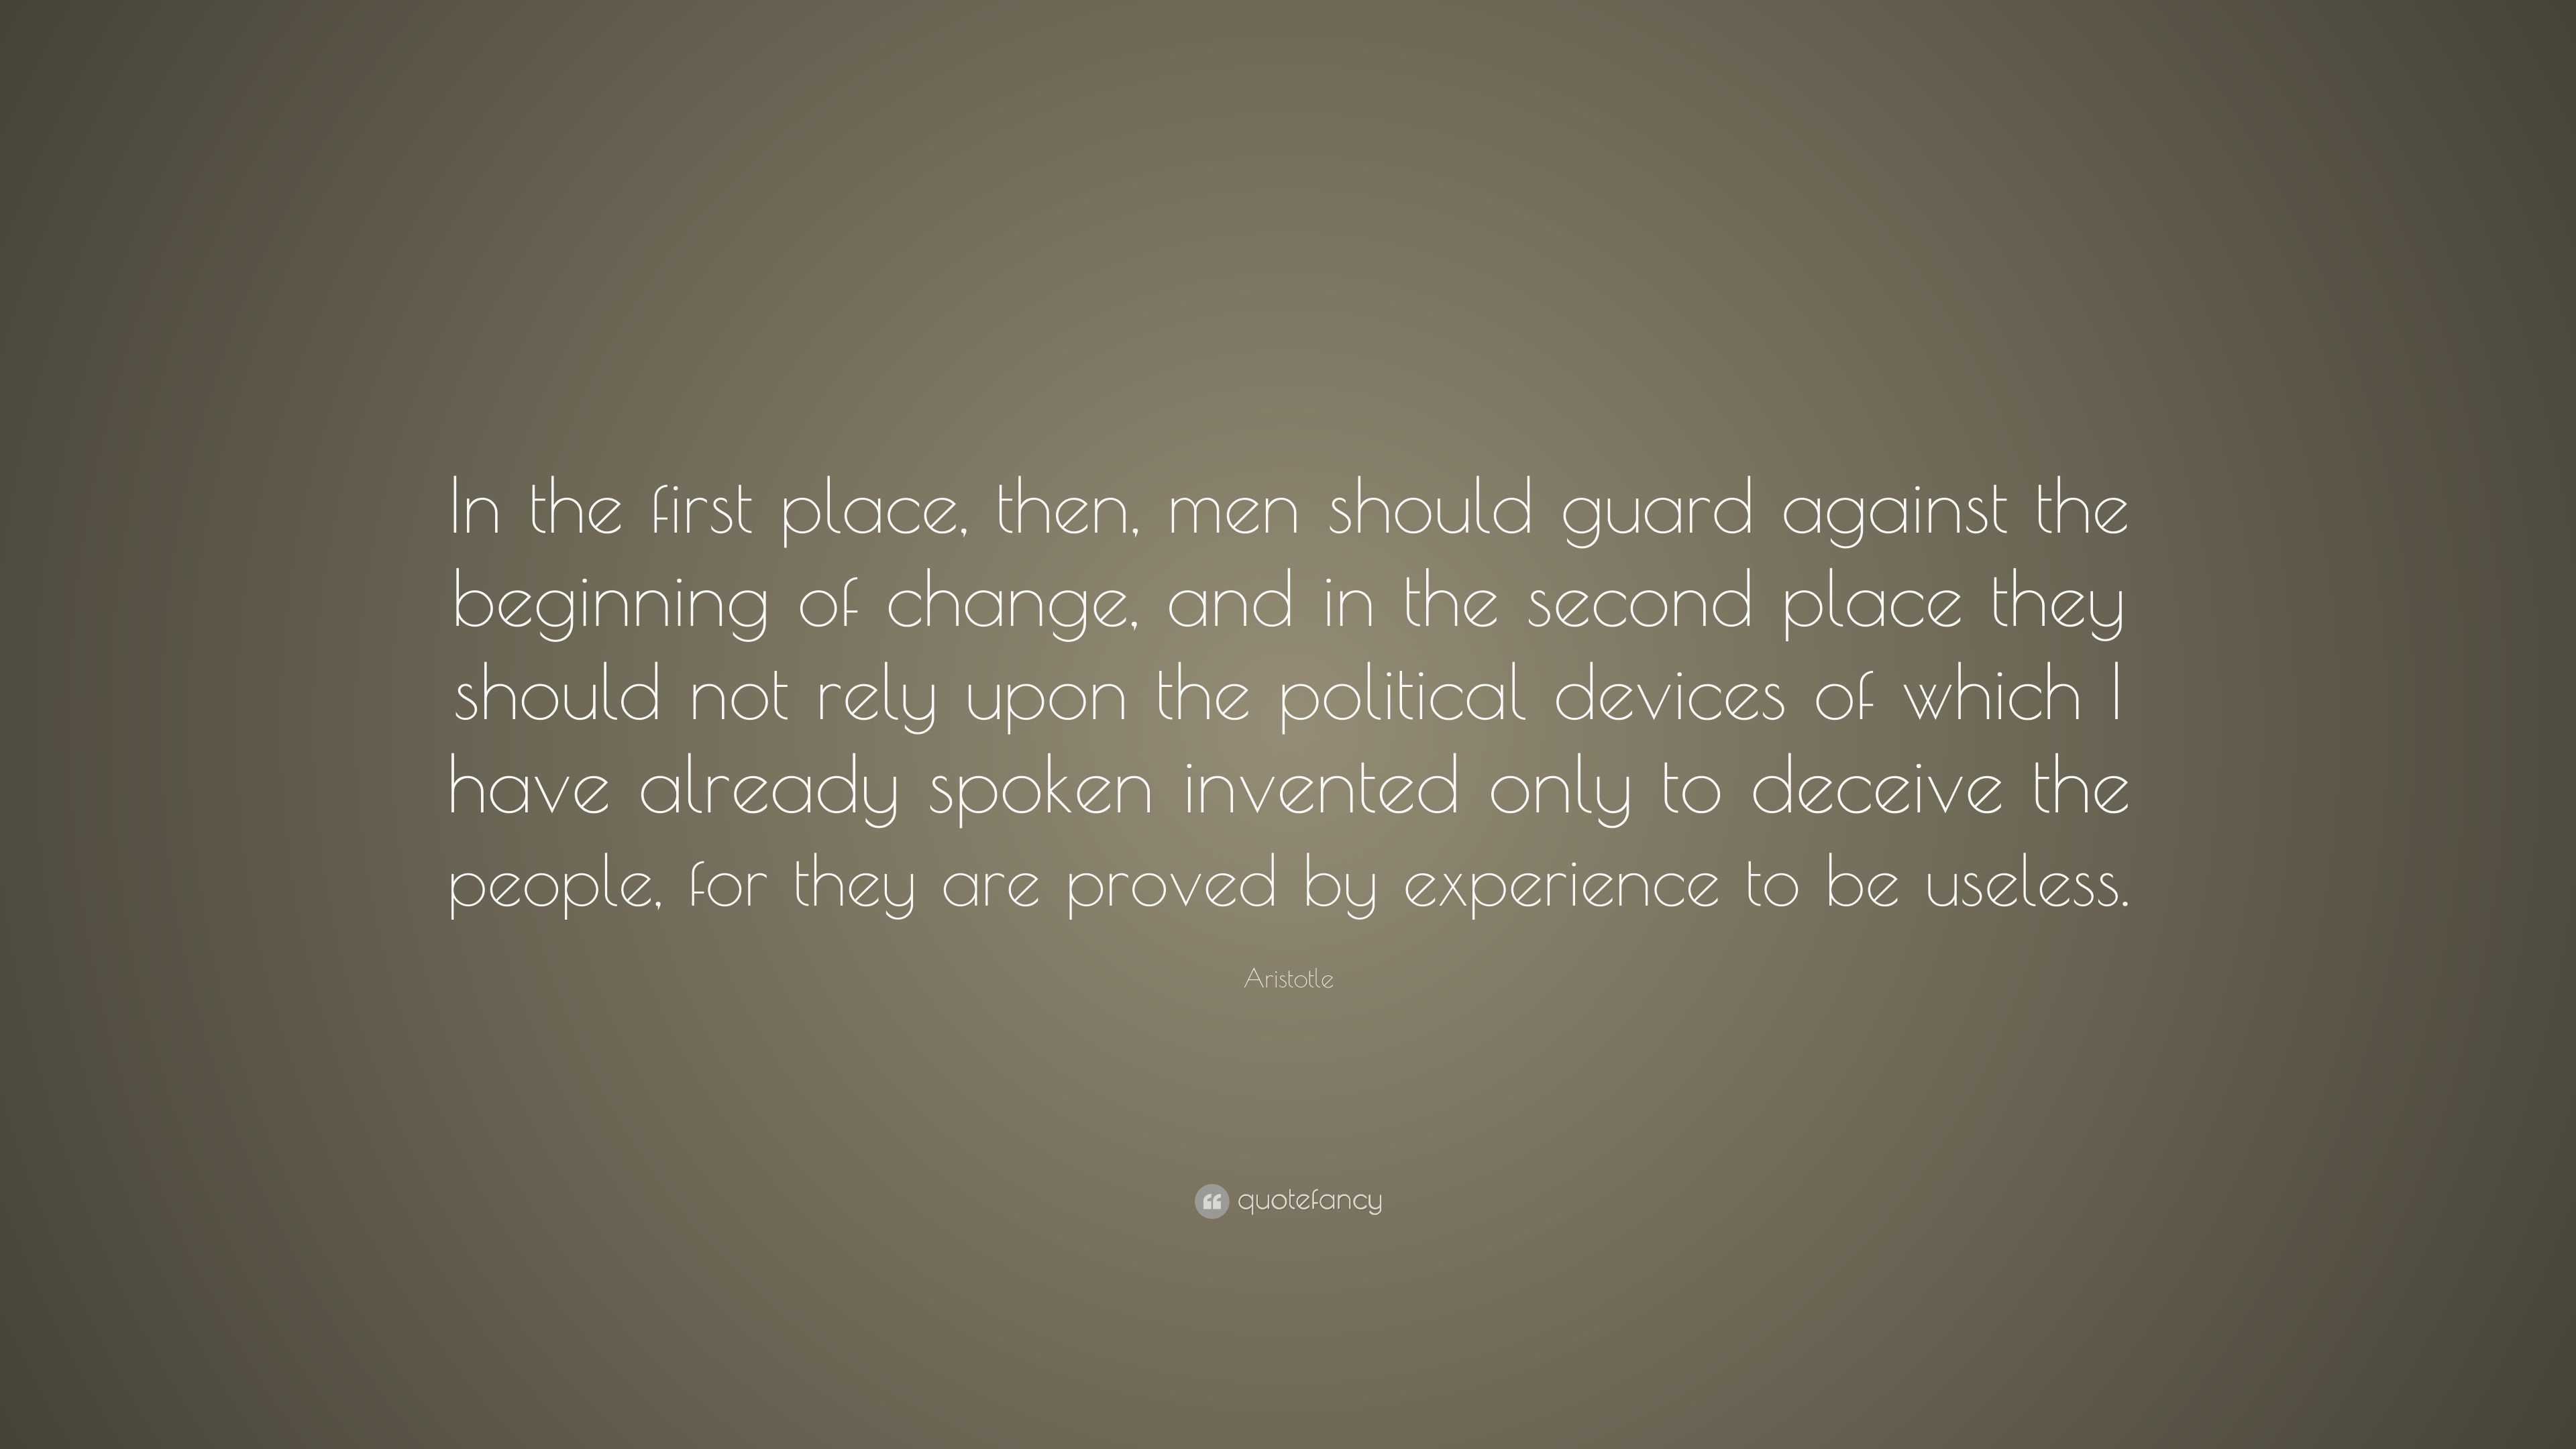 Aristotle Quote: “In the first place, then, men should guard against ...